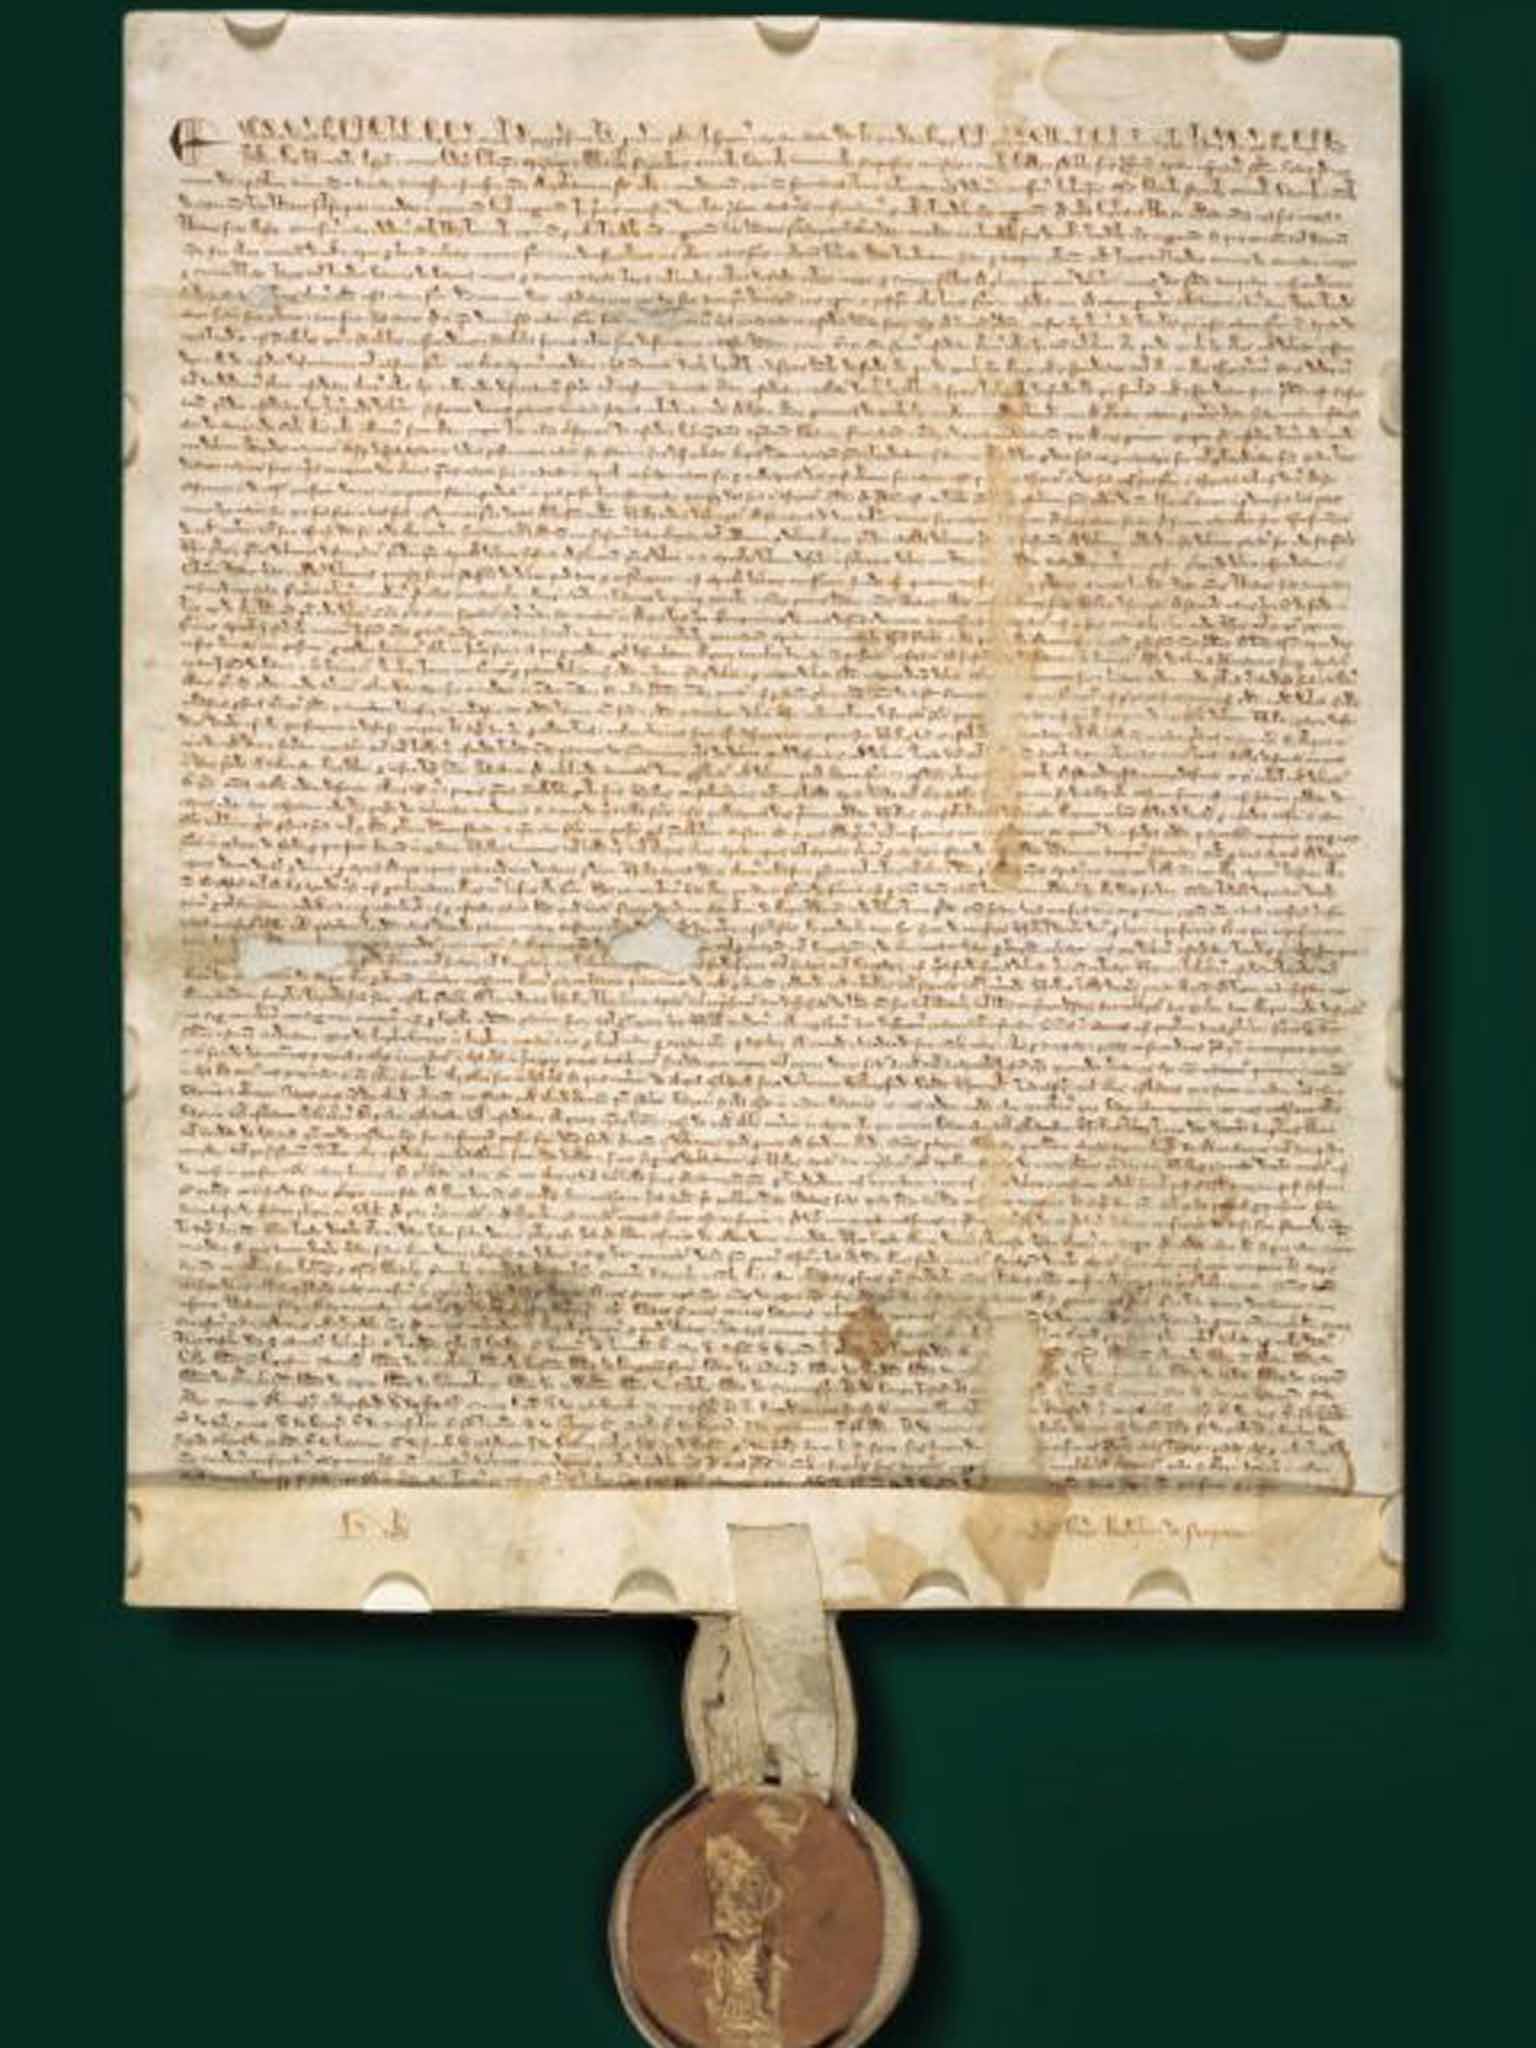 Magna Carta, which was signed by King John at Runnymede in 1215